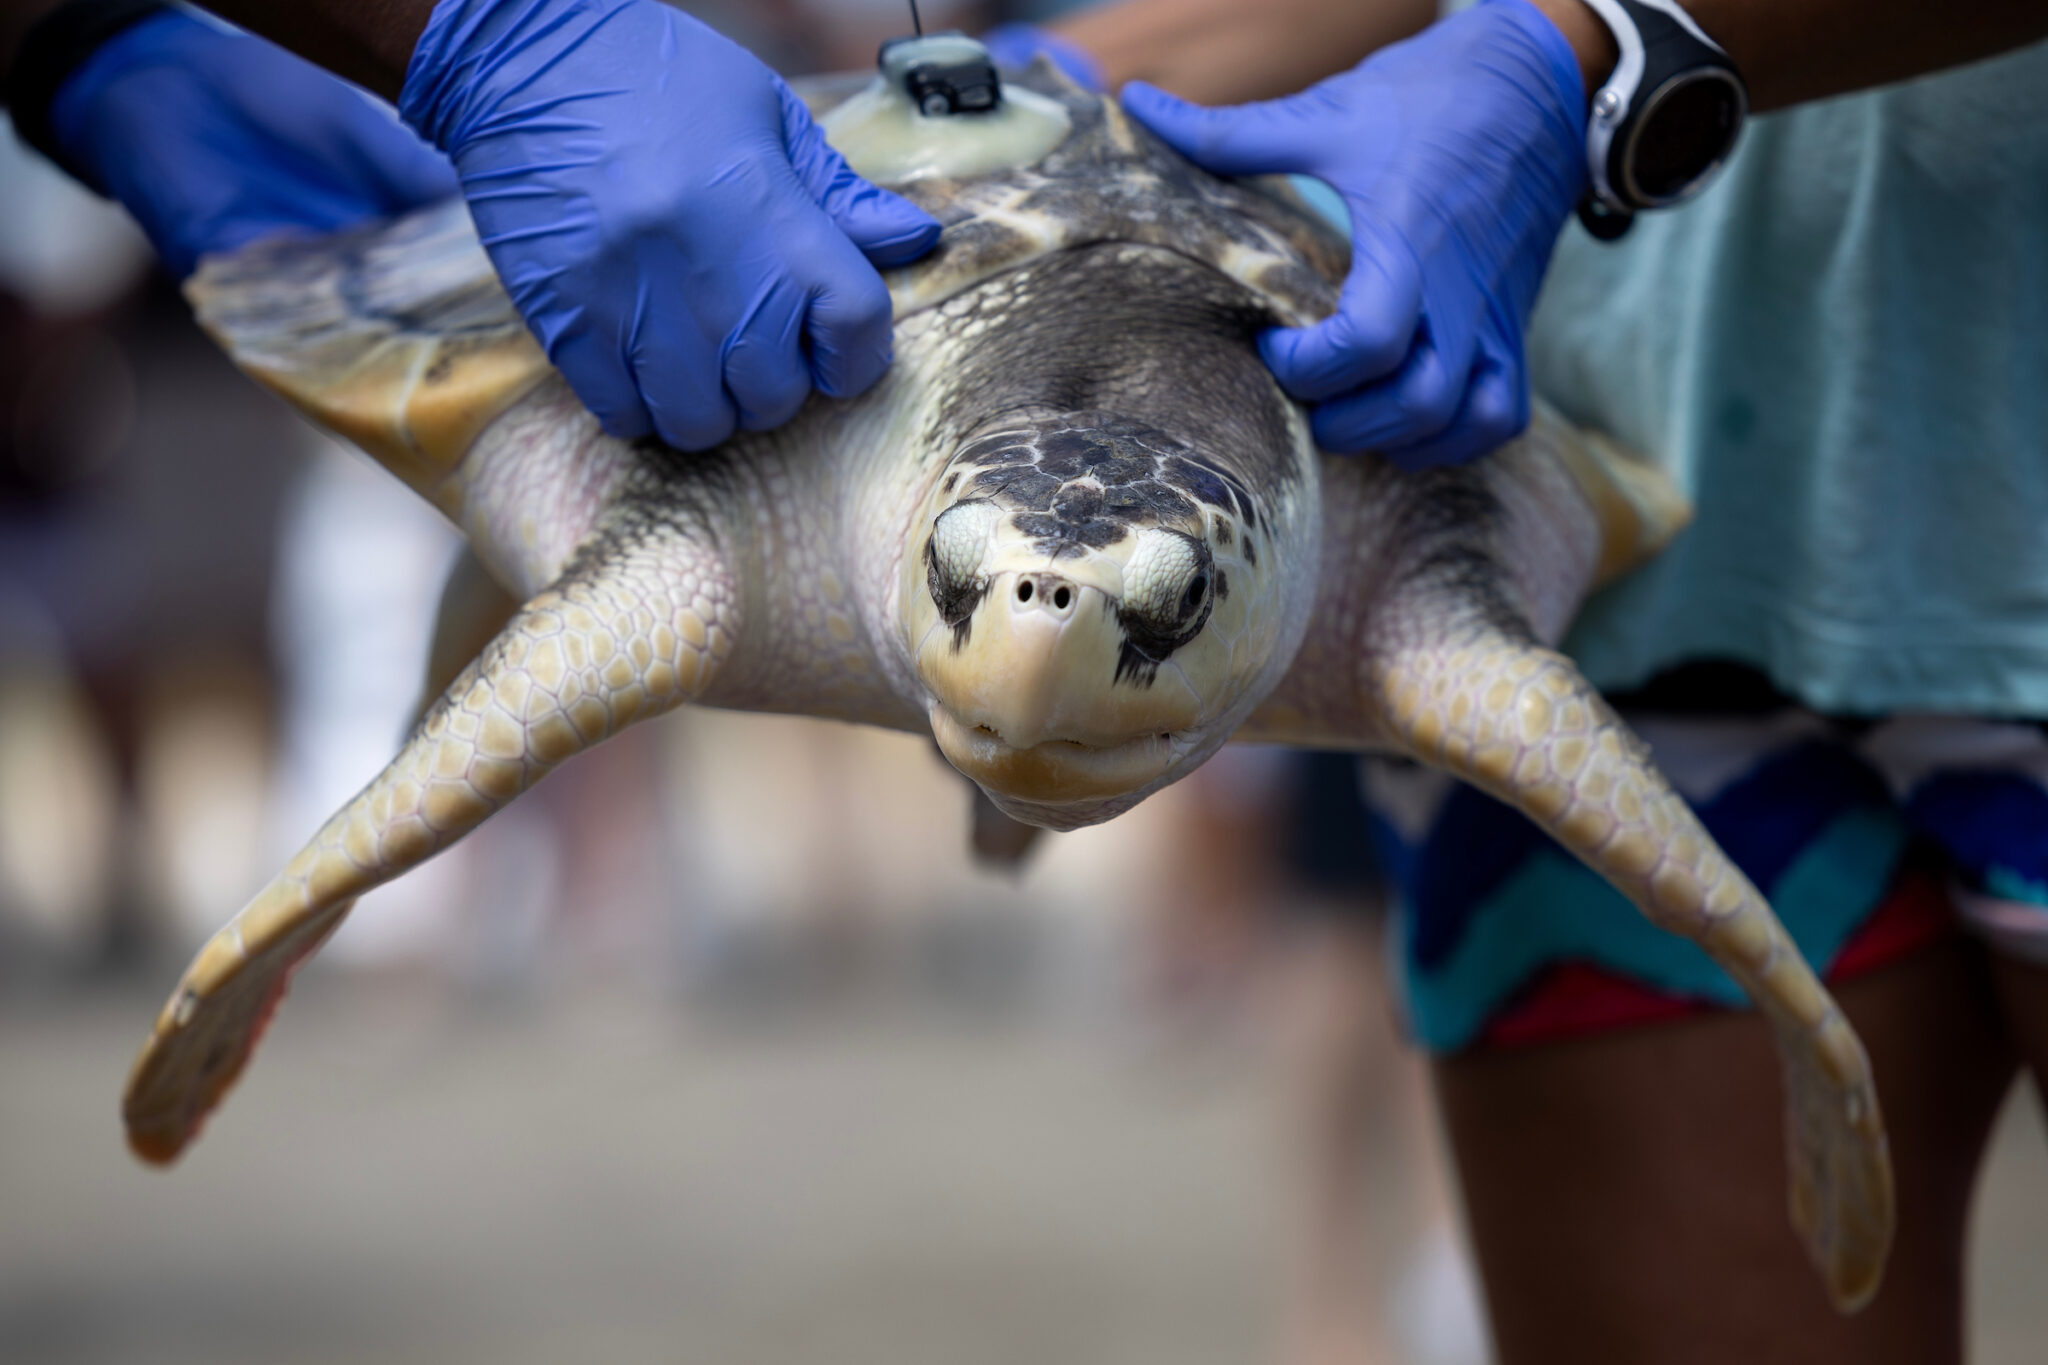 Close-up of Tally, a Kemp's ridley sea turtle, being held aloft at waist height by two people wearing blue latex gloves and grasping the edges of her shell